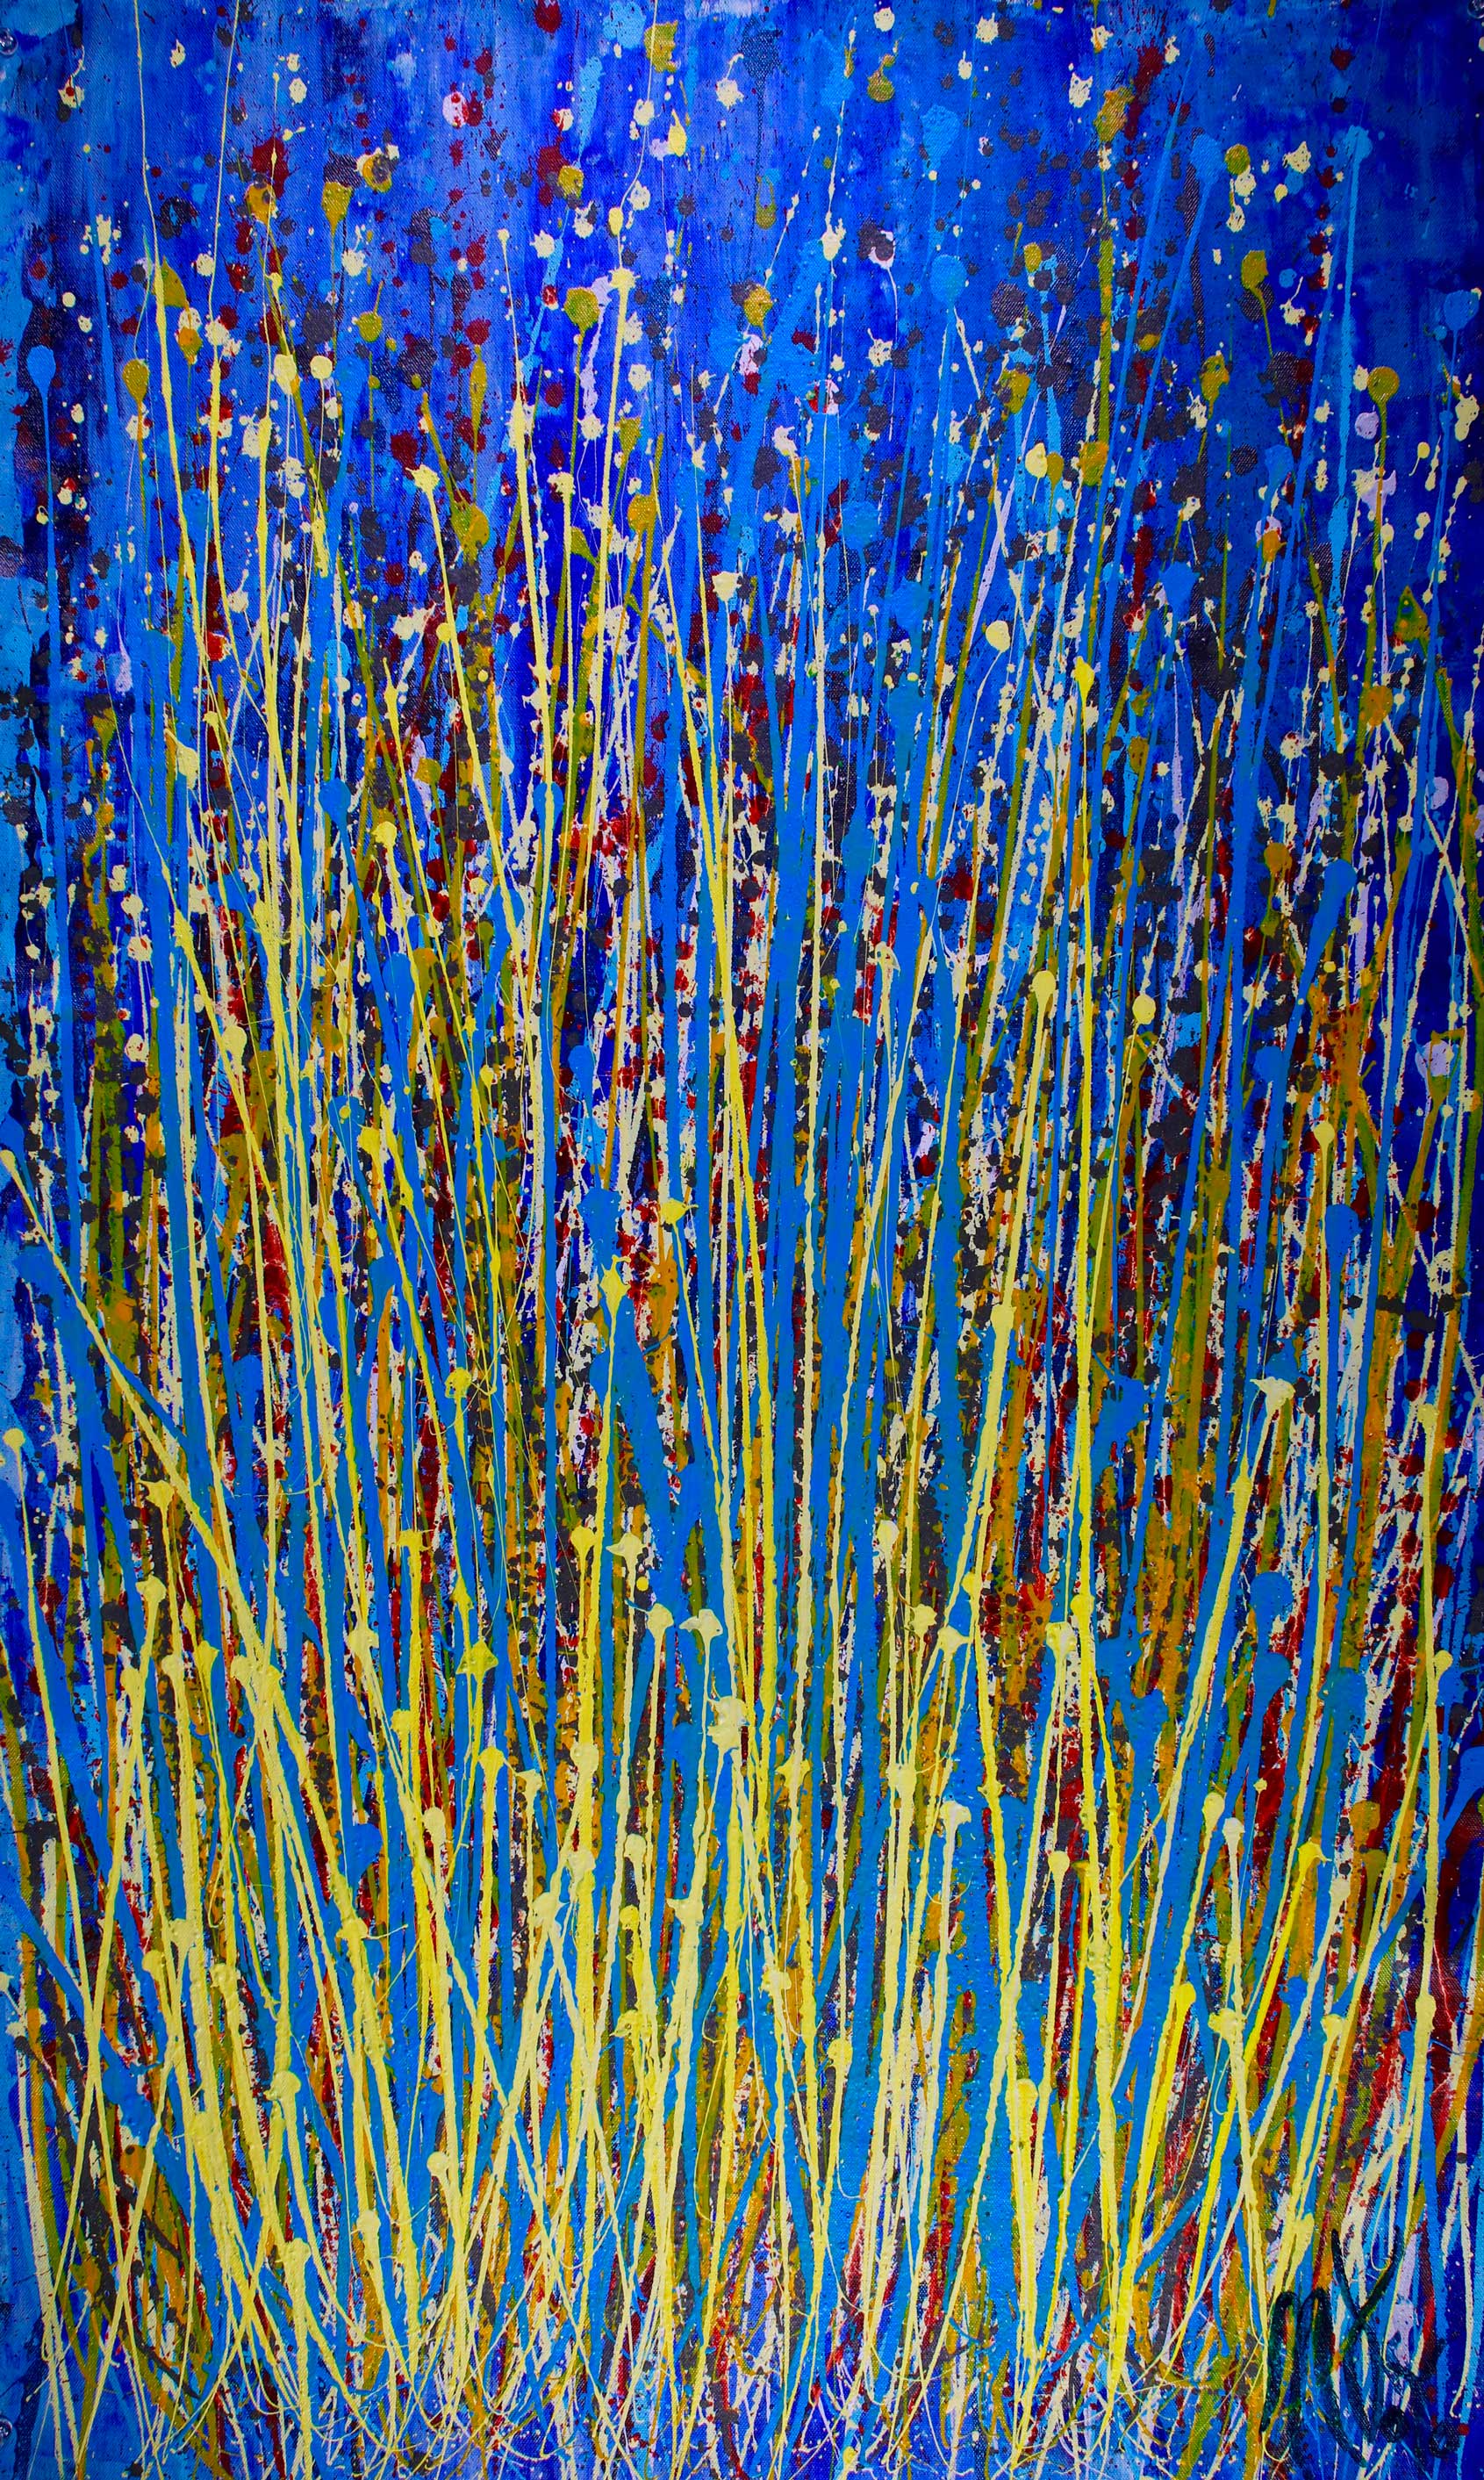 SOLD - Color Contemplation Over Blue by Nestor Toro - SOLD